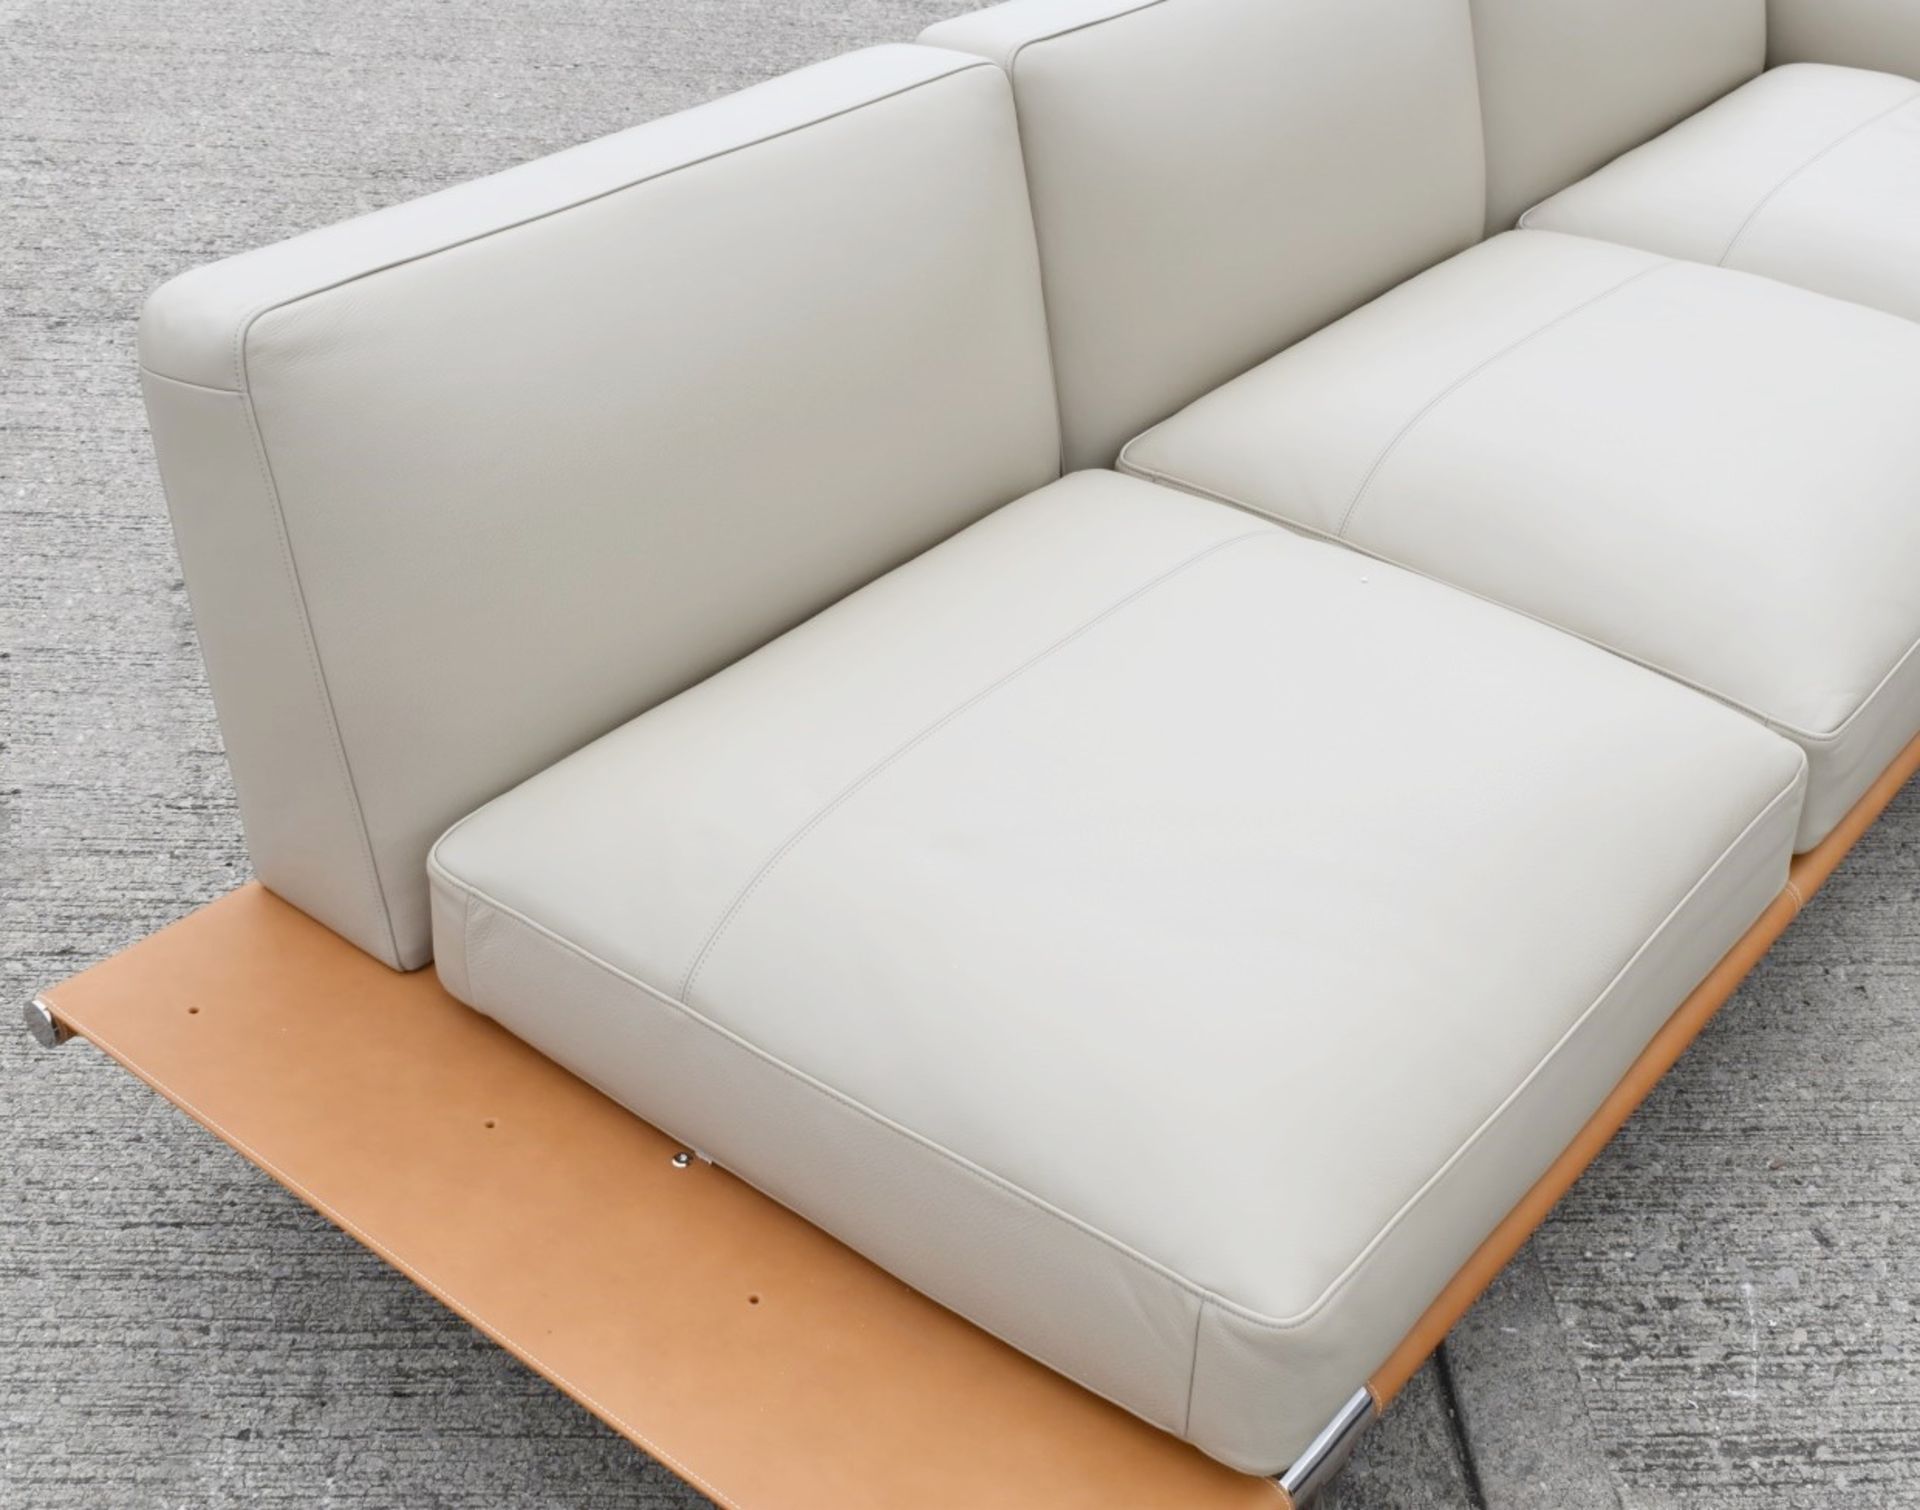 1 x POLTRONA FRAU Let It Be Designer Leather Modular 3-Seater Sofa with Storage End - RRP £14,000 - Image 8 of 21